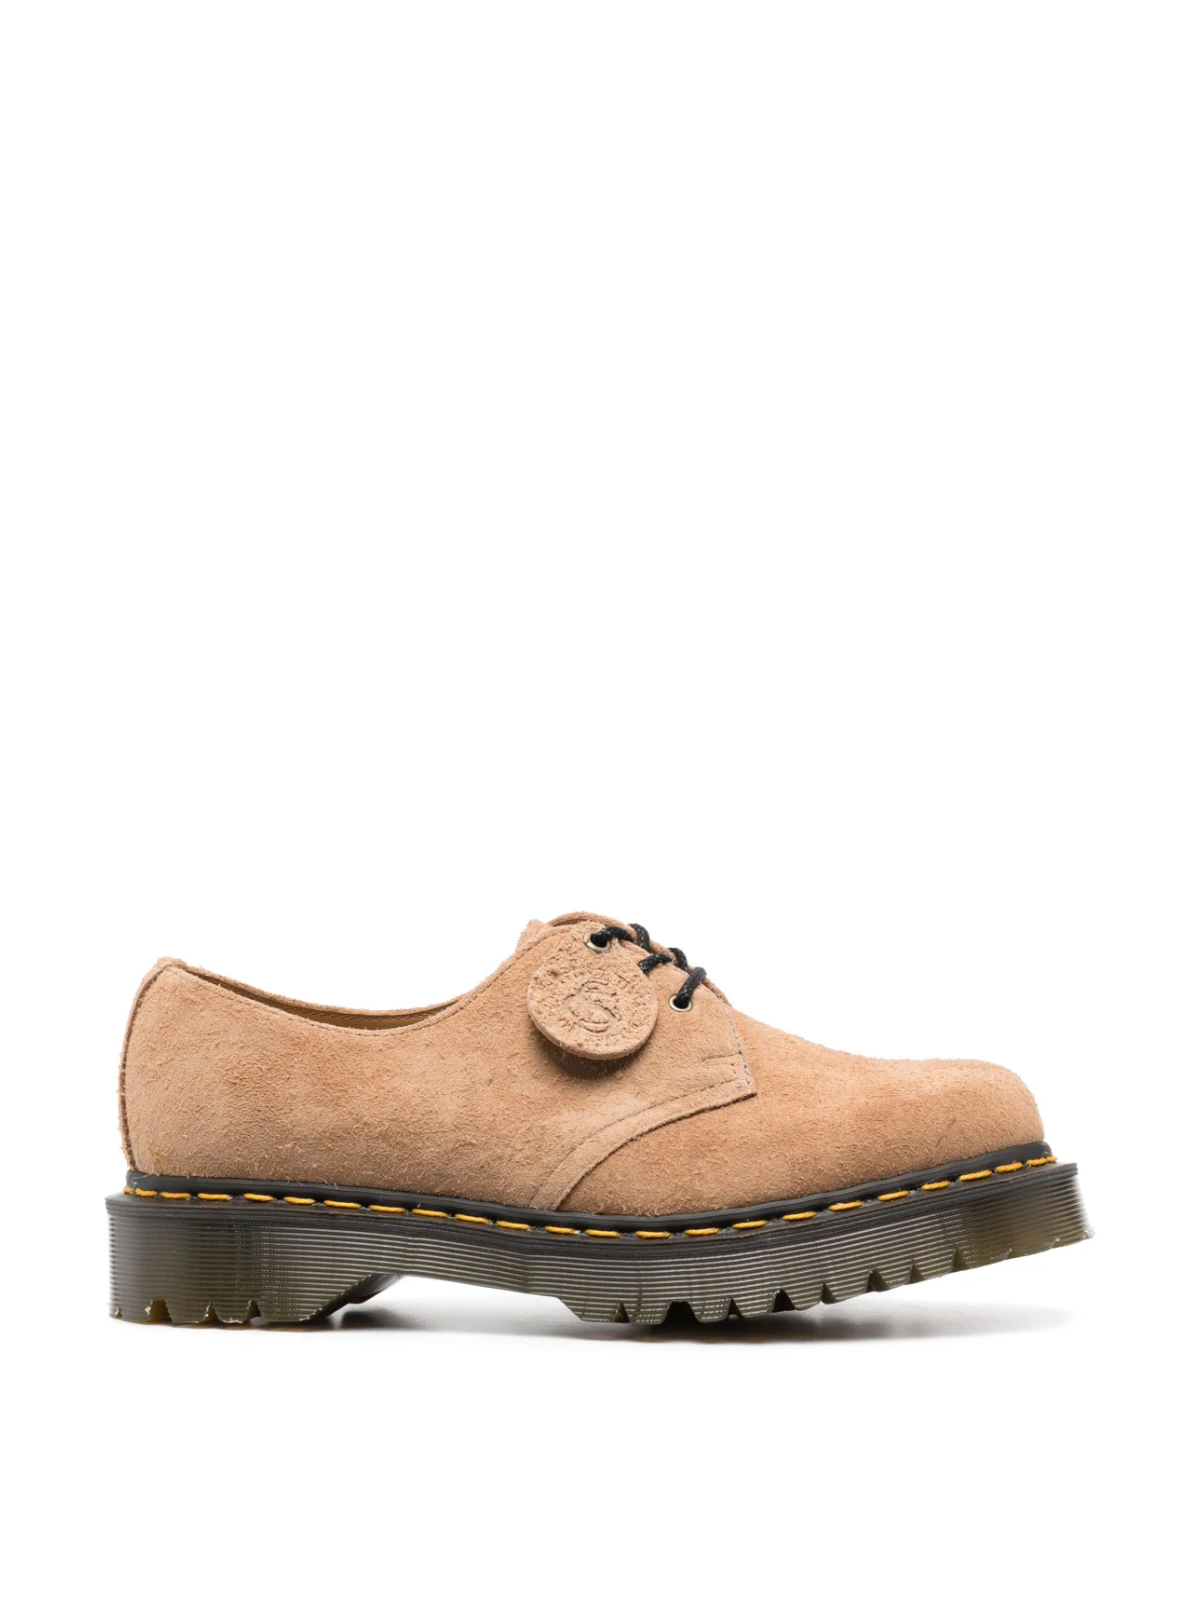 Dr. Martens 1461 Bex x C.F. Stead Lace-up Derby